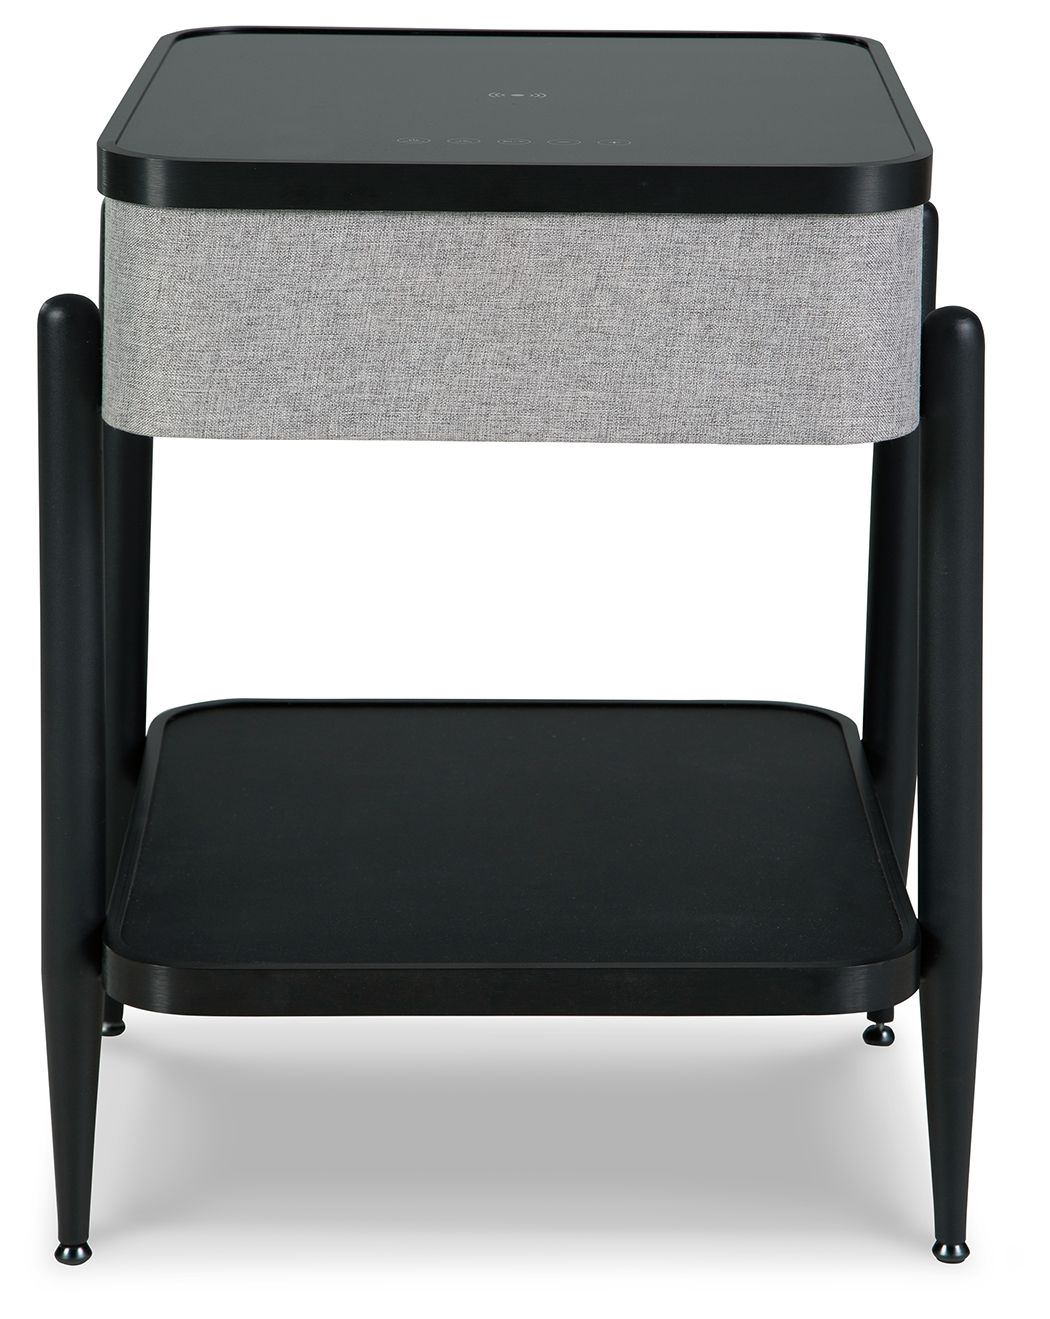 Jorvalee - Gray / Black - Accent Table